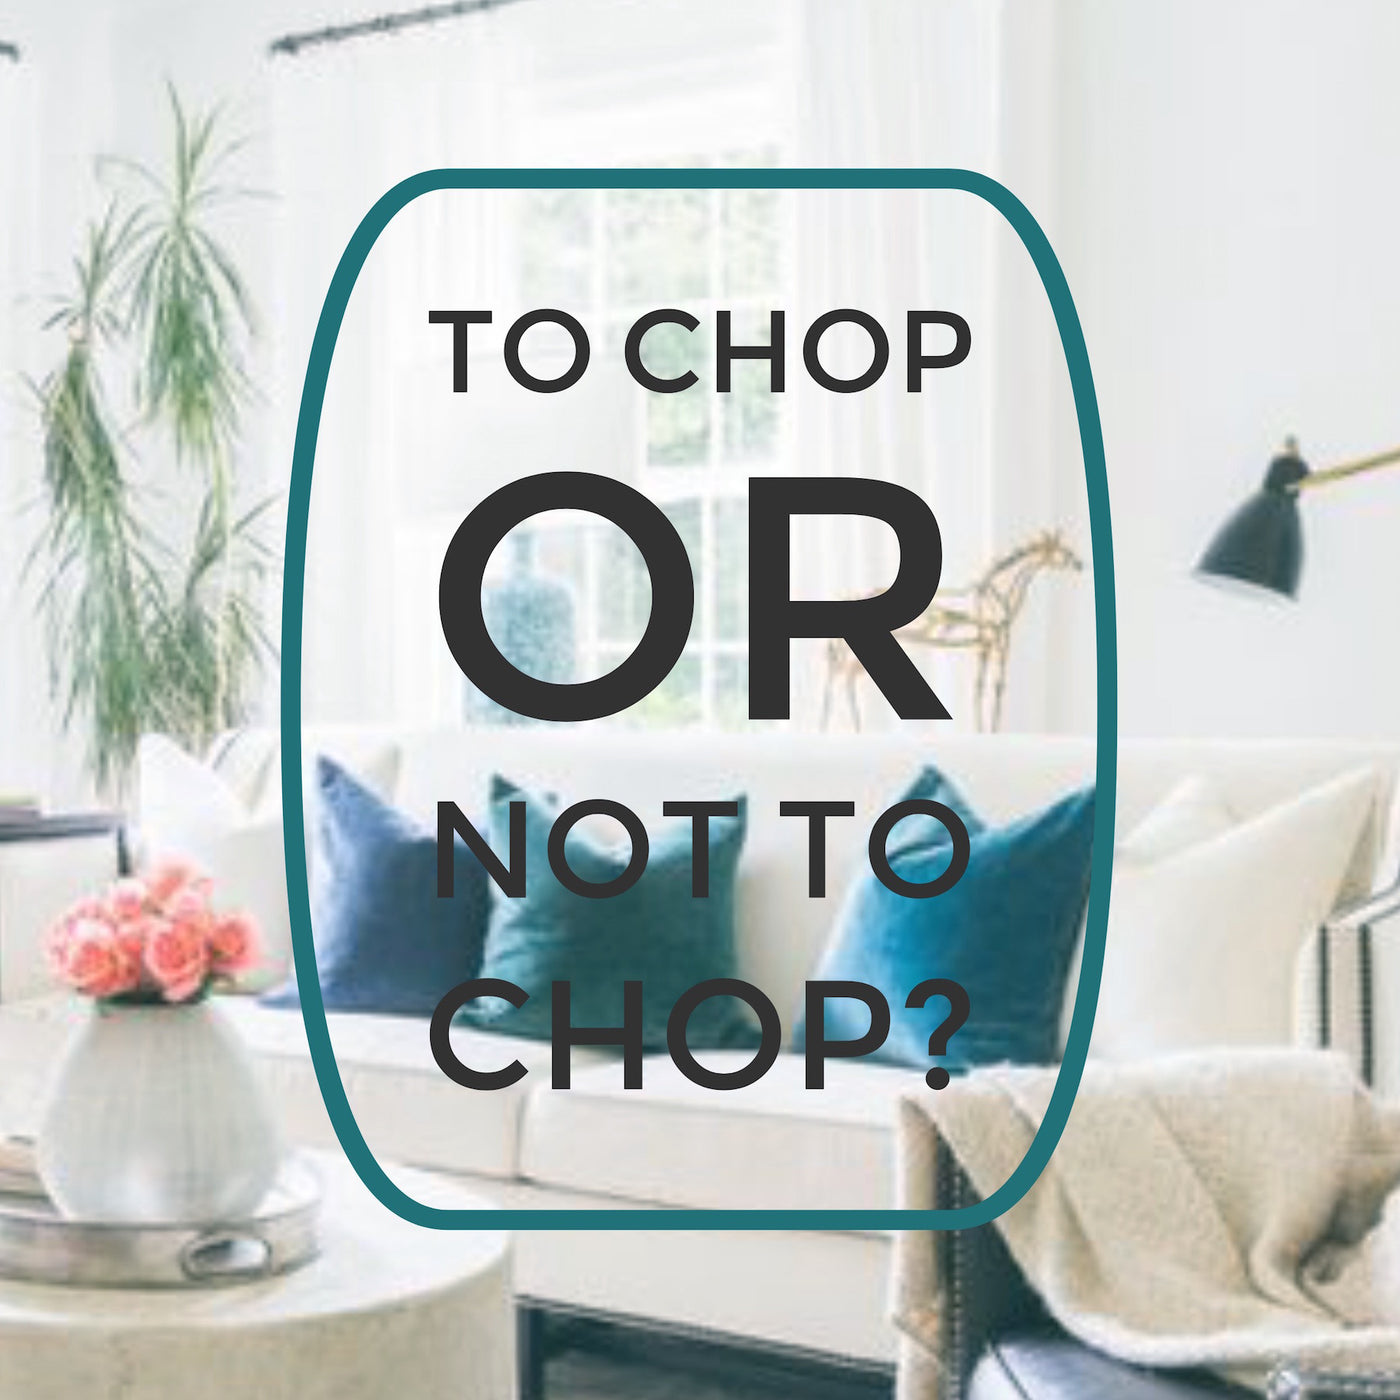 To Chop or Not to Chop?